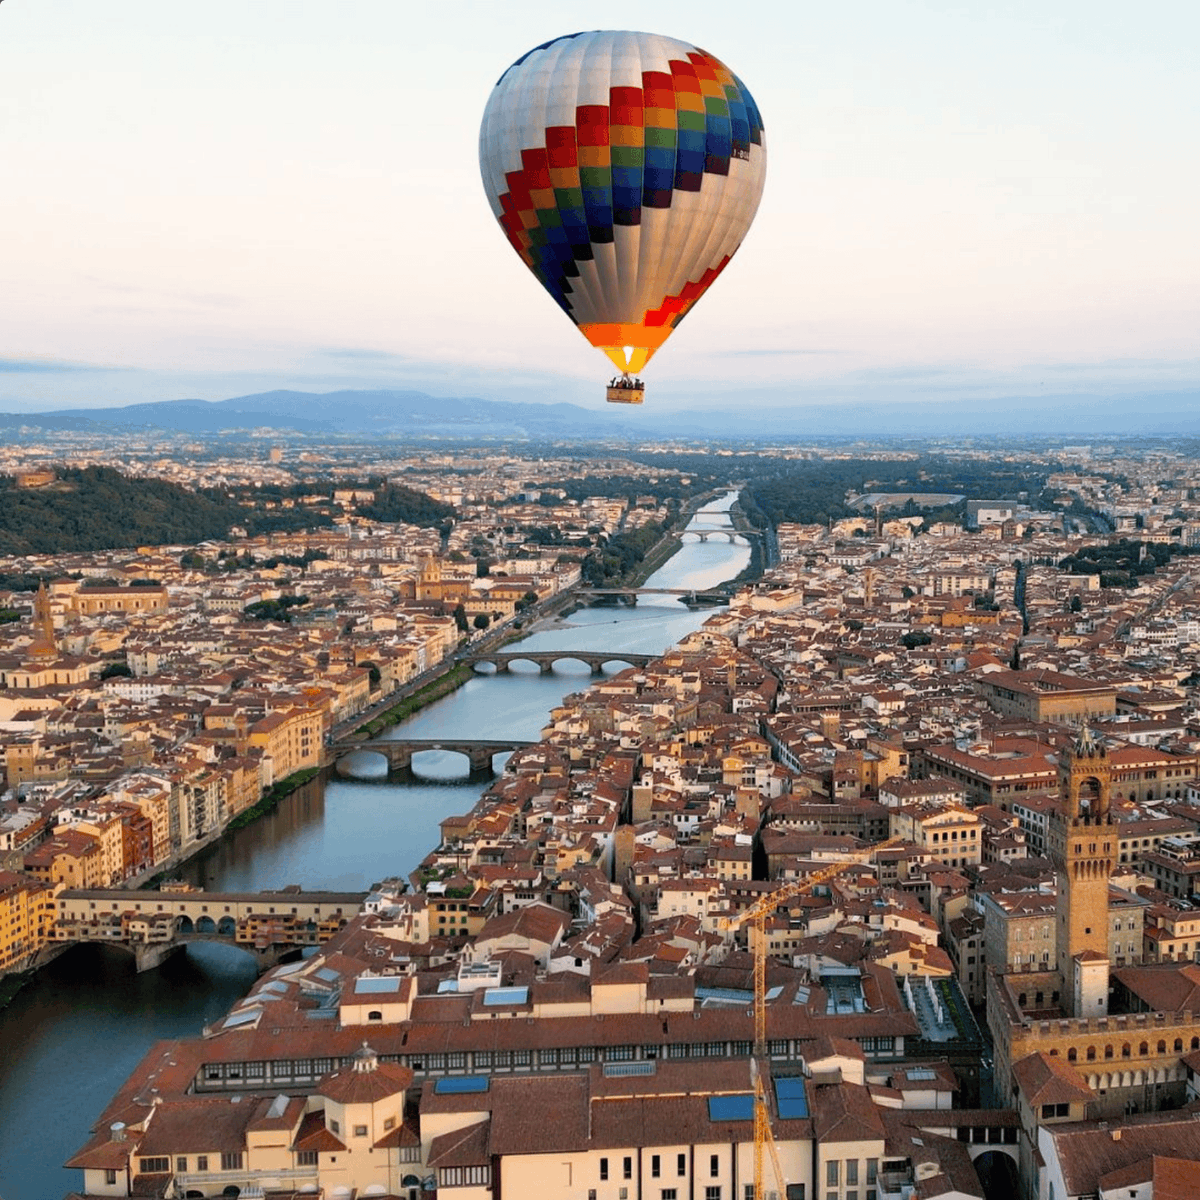 From a flying festival to heritage walks to connect more deeply to the city and surroundings, this week’s best events vary from the highbrow to the unforgettably fun. Here are your best events in #Florence this week. 👉theflorentine.net/best-events-in…